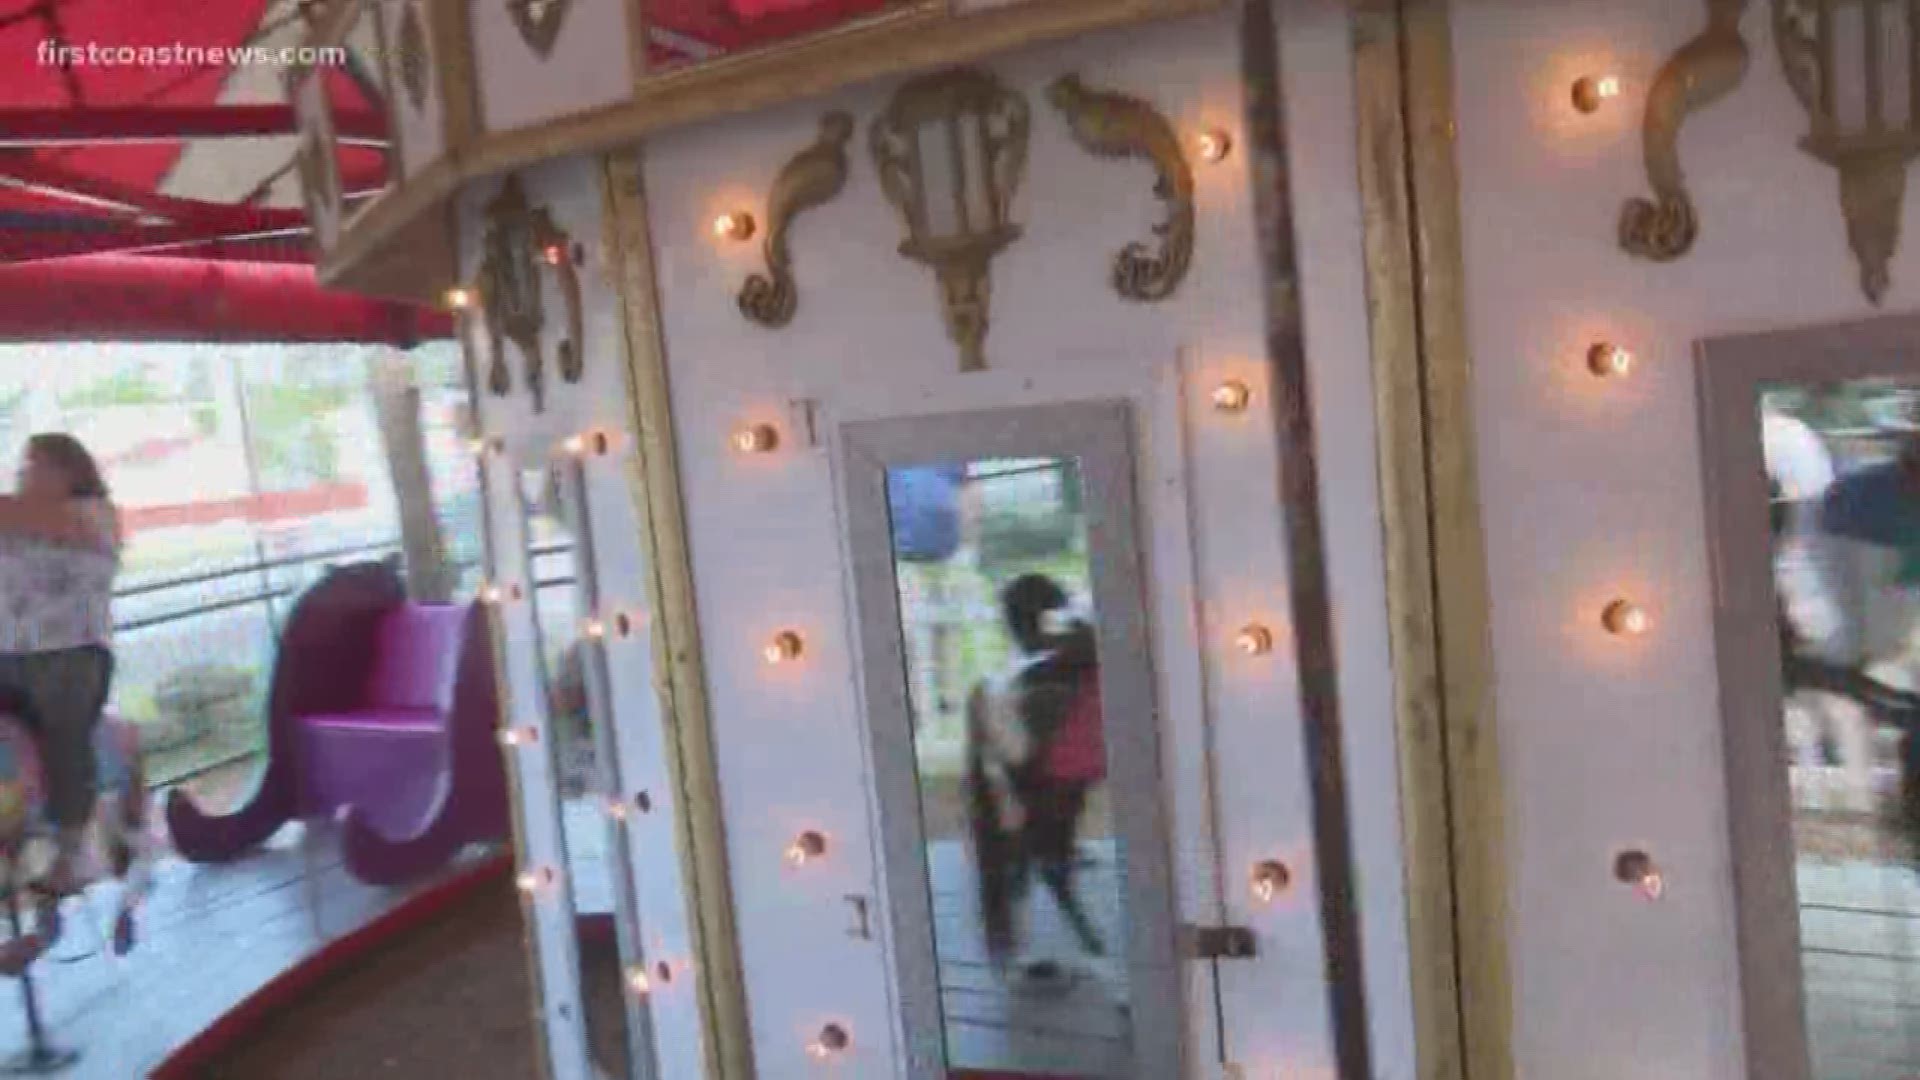 The iconic St. Augustine carousel will move back to Port Charlotte to honor the wish of the attraction's operator, who died over the weekend.